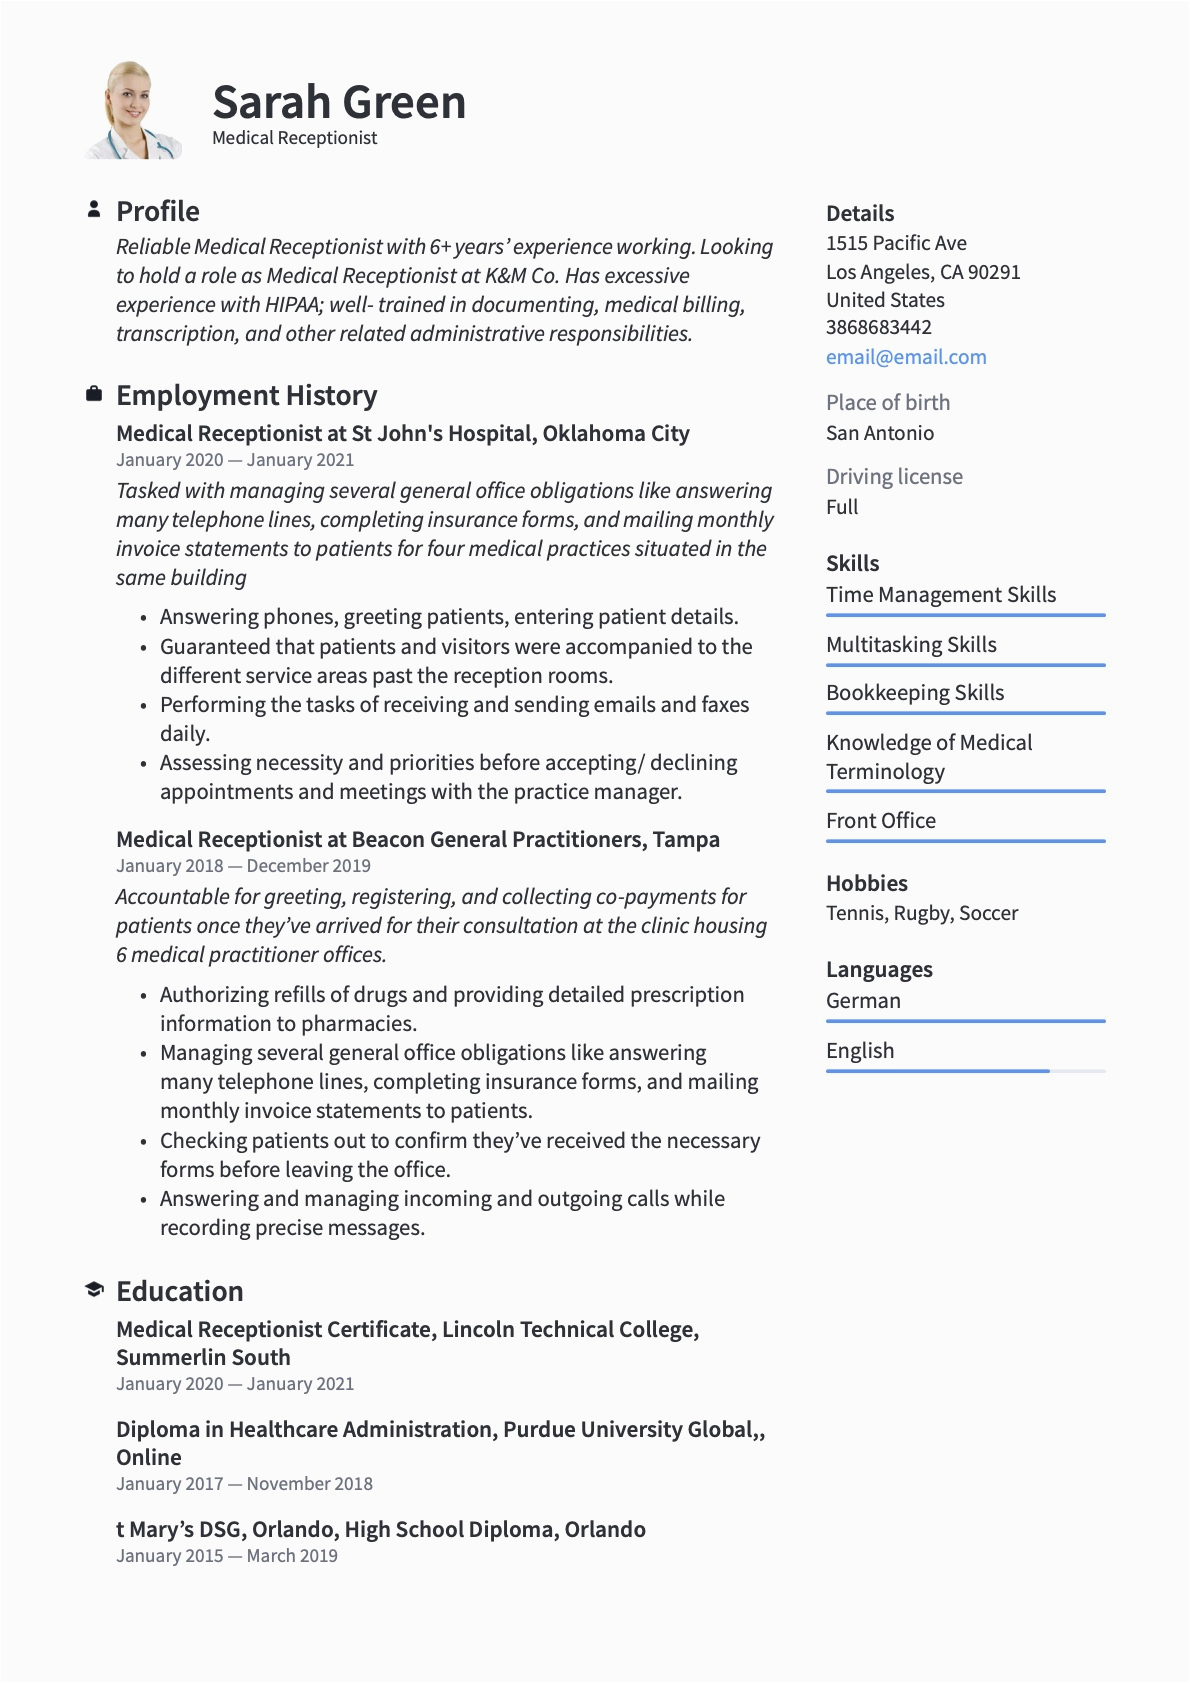 Sample Resume for Medical Receptionist with Experience Medical Receptionist Resume & Guide